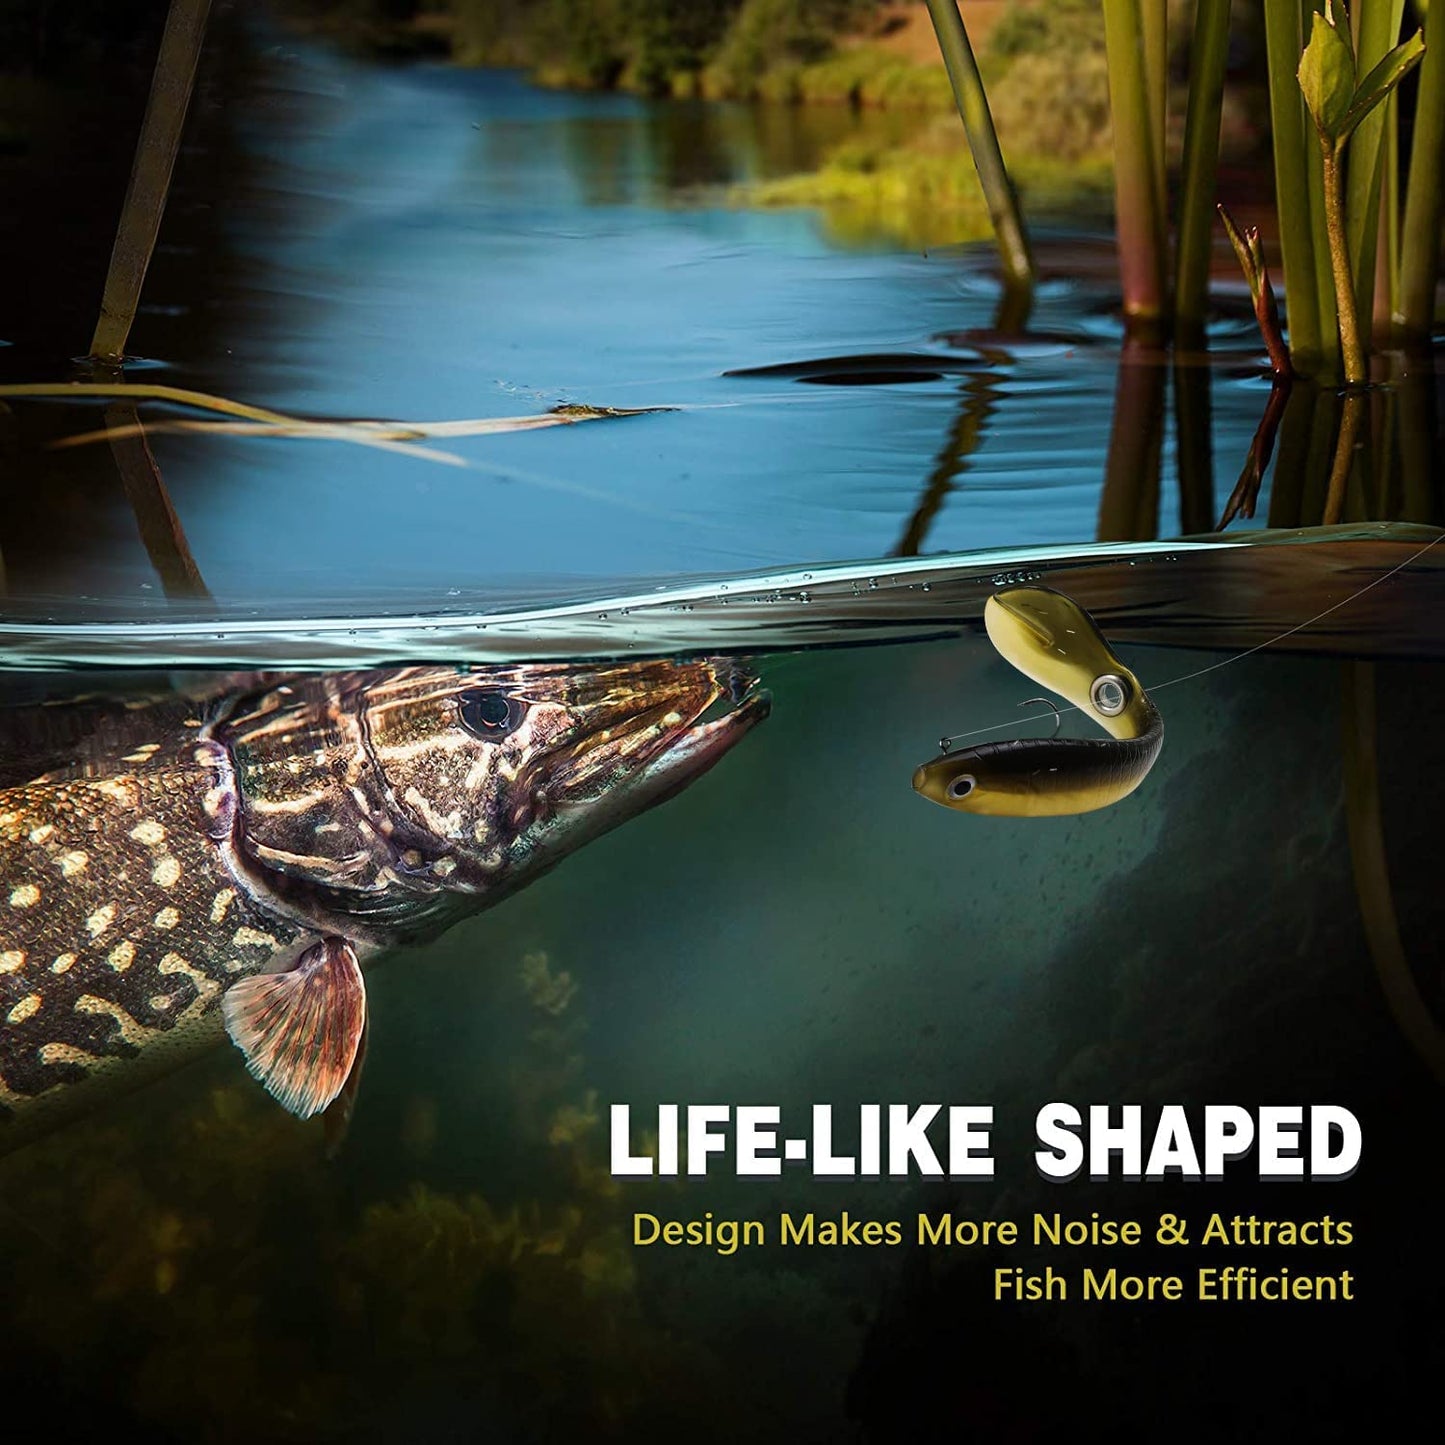 Bionic Fishing Lures: Hook More Fish with Realistic Design and Movement